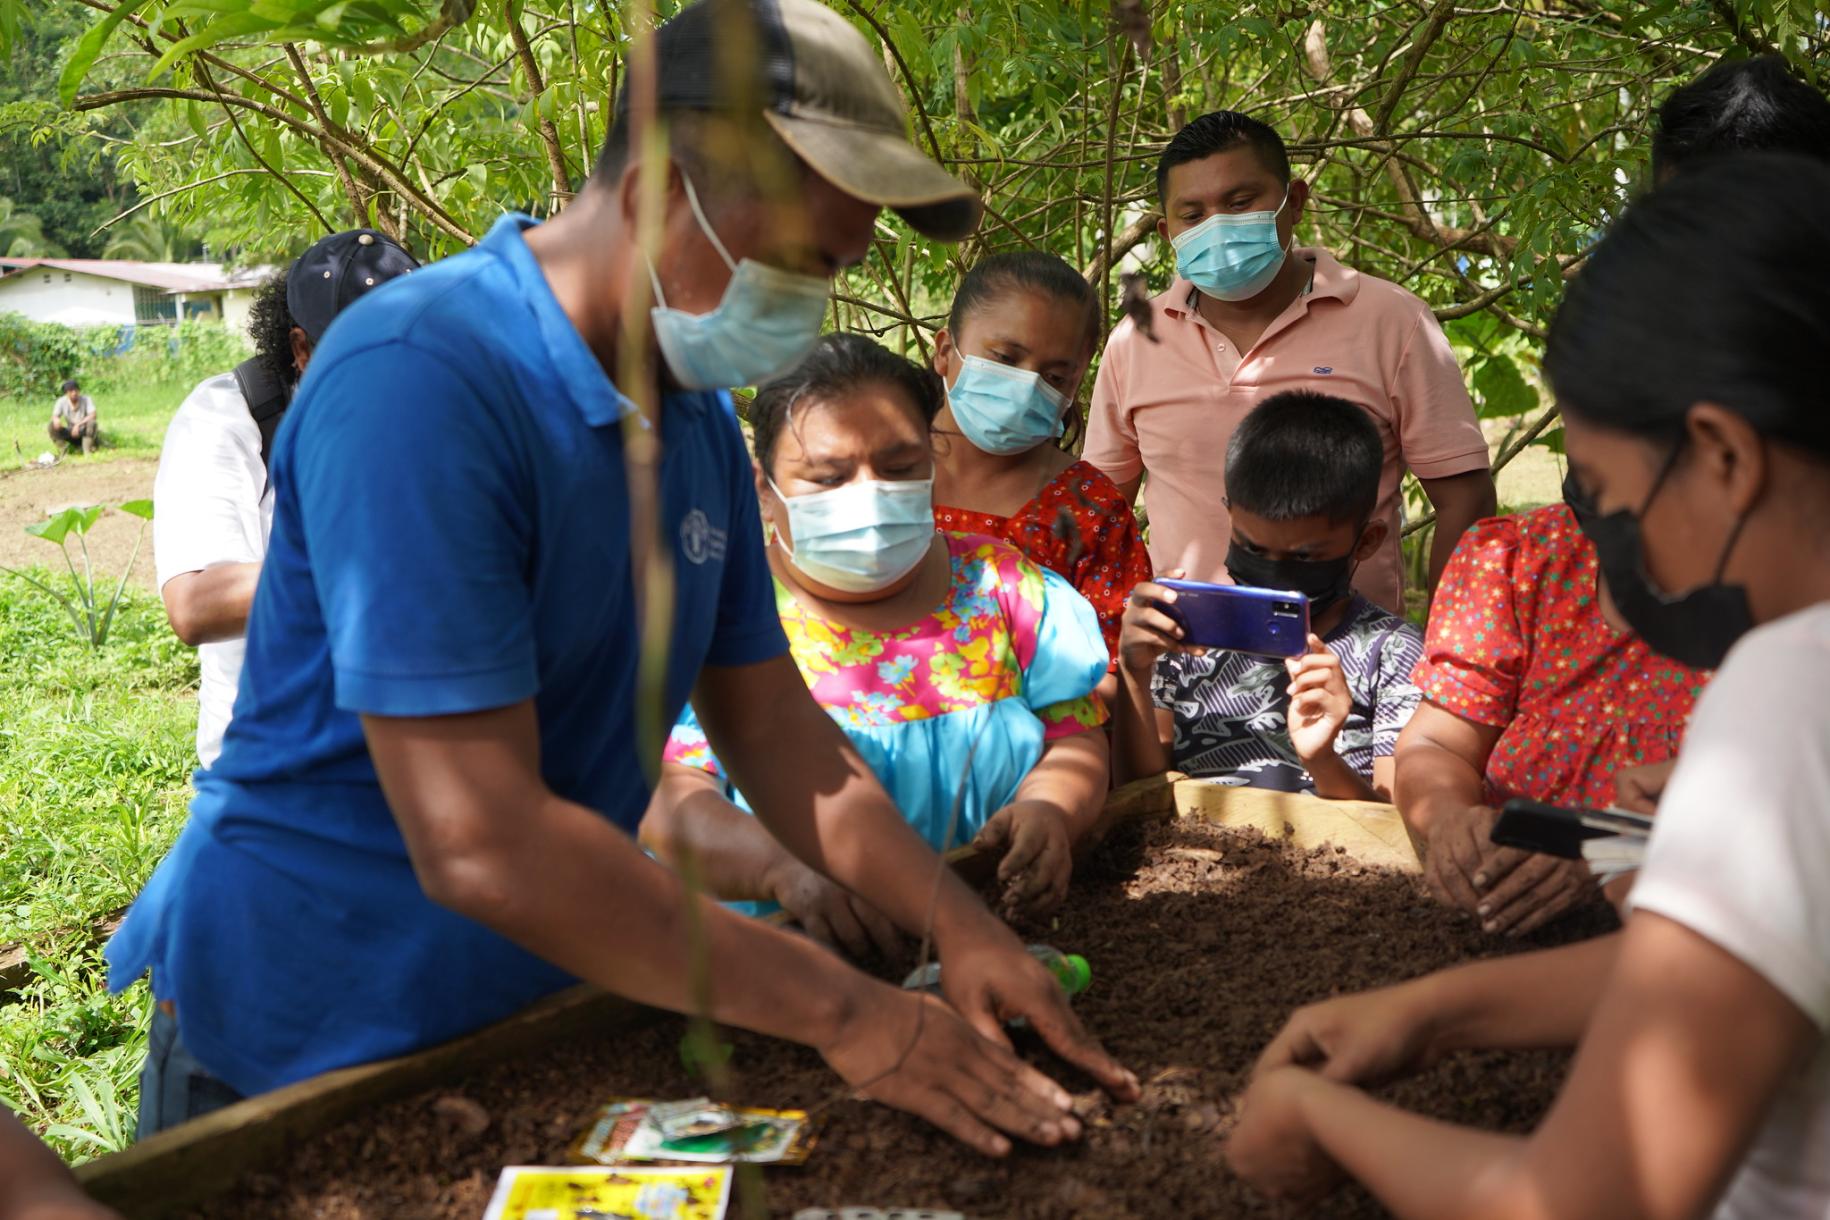 A man wearing an FAO shirt is planting seedlings, while a group of women look on